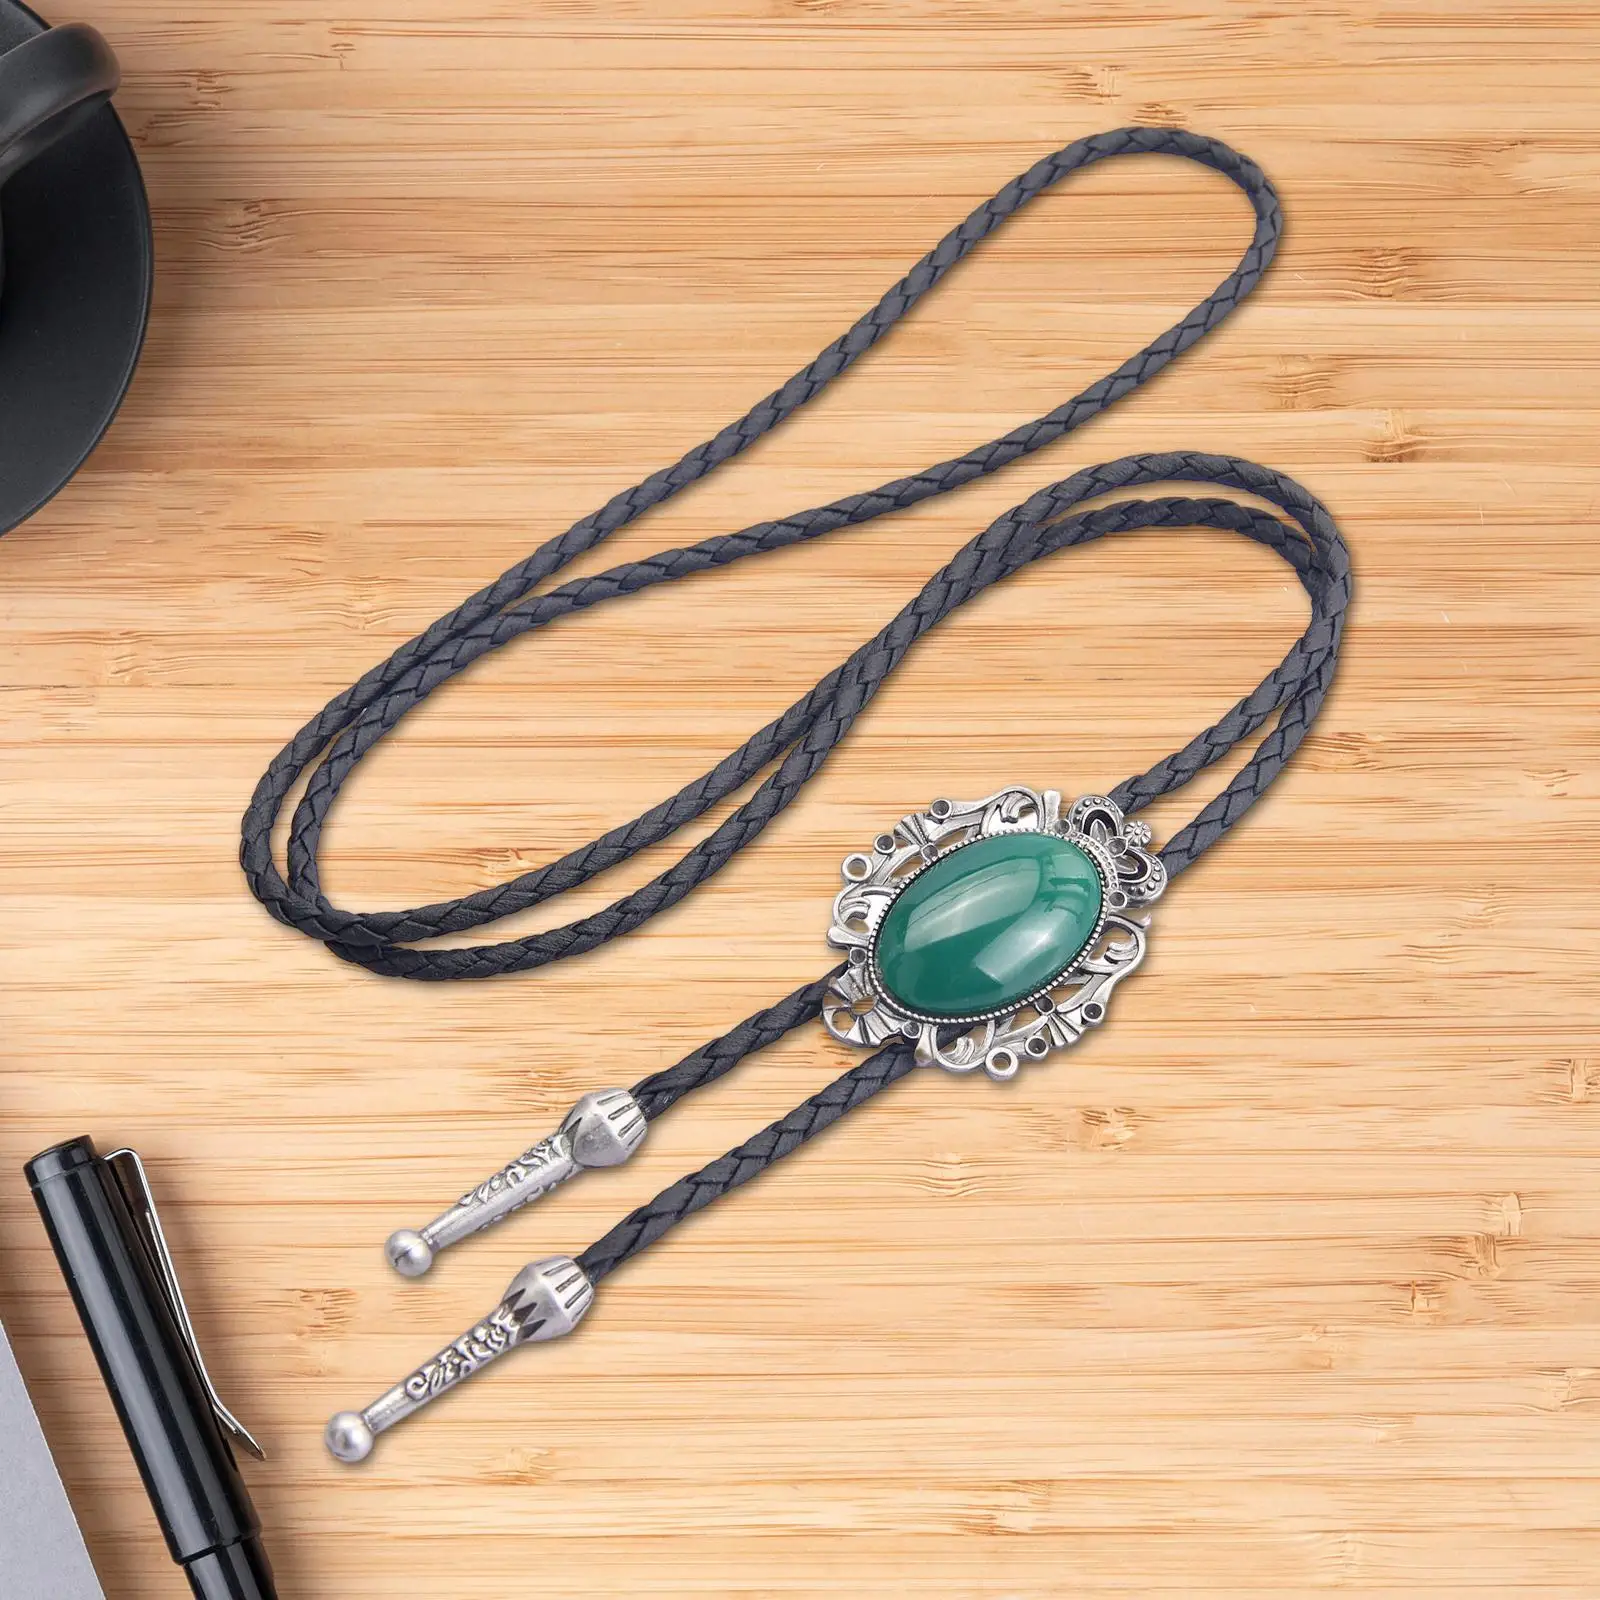 American Style Bolo Tie Charm Chain Pendant Necklace PU Leather Rope Necktie for Birthday Prom Graduation Engagement Banquet